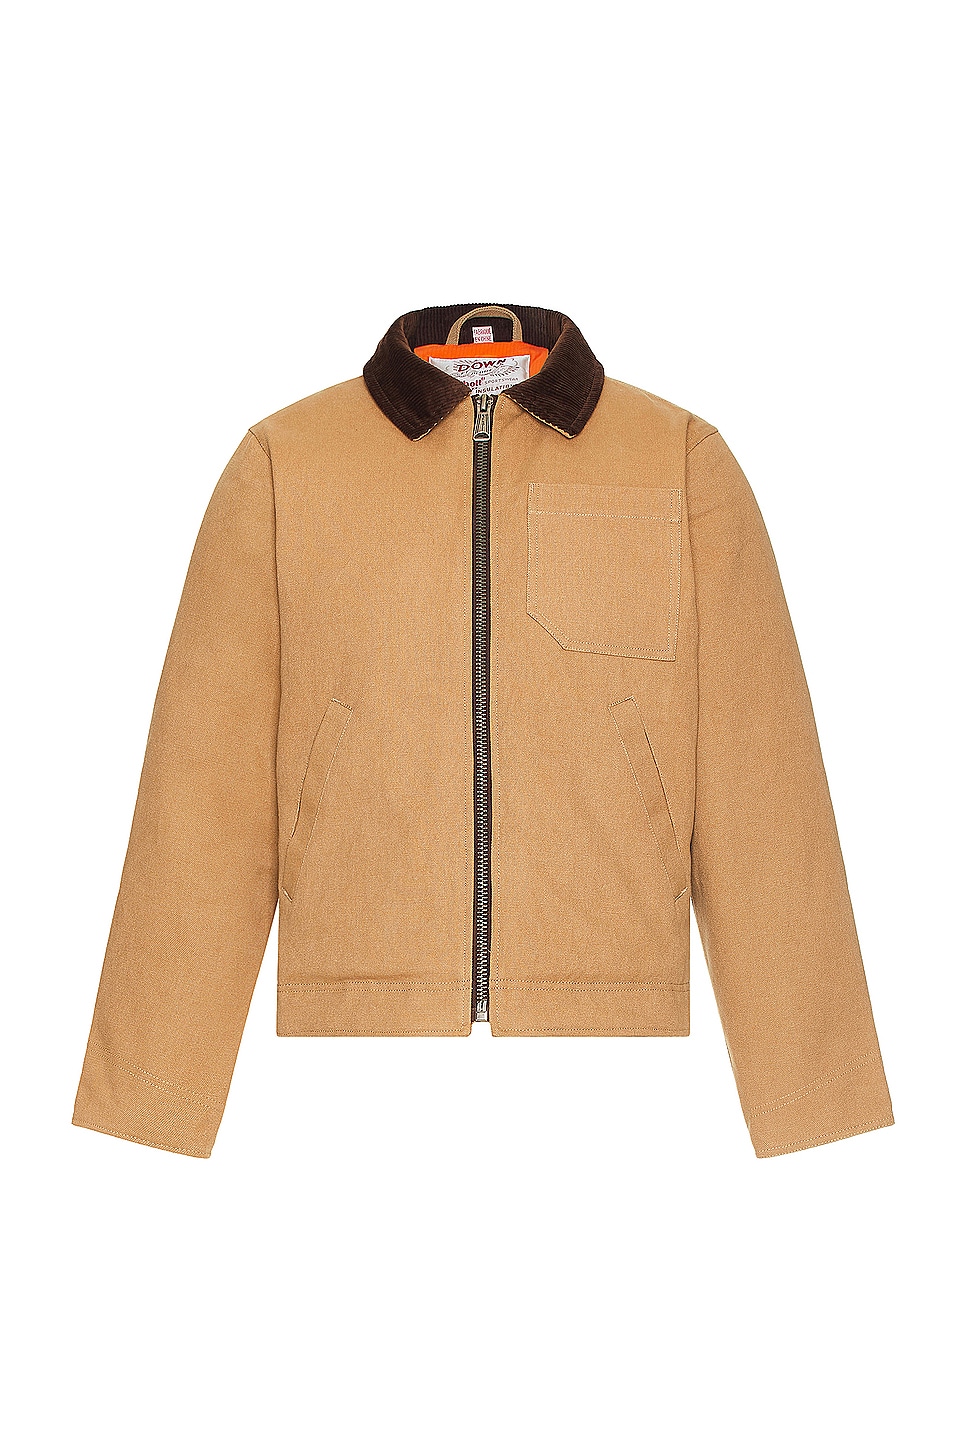 Union Canvas Down Filled Jacket in Tan